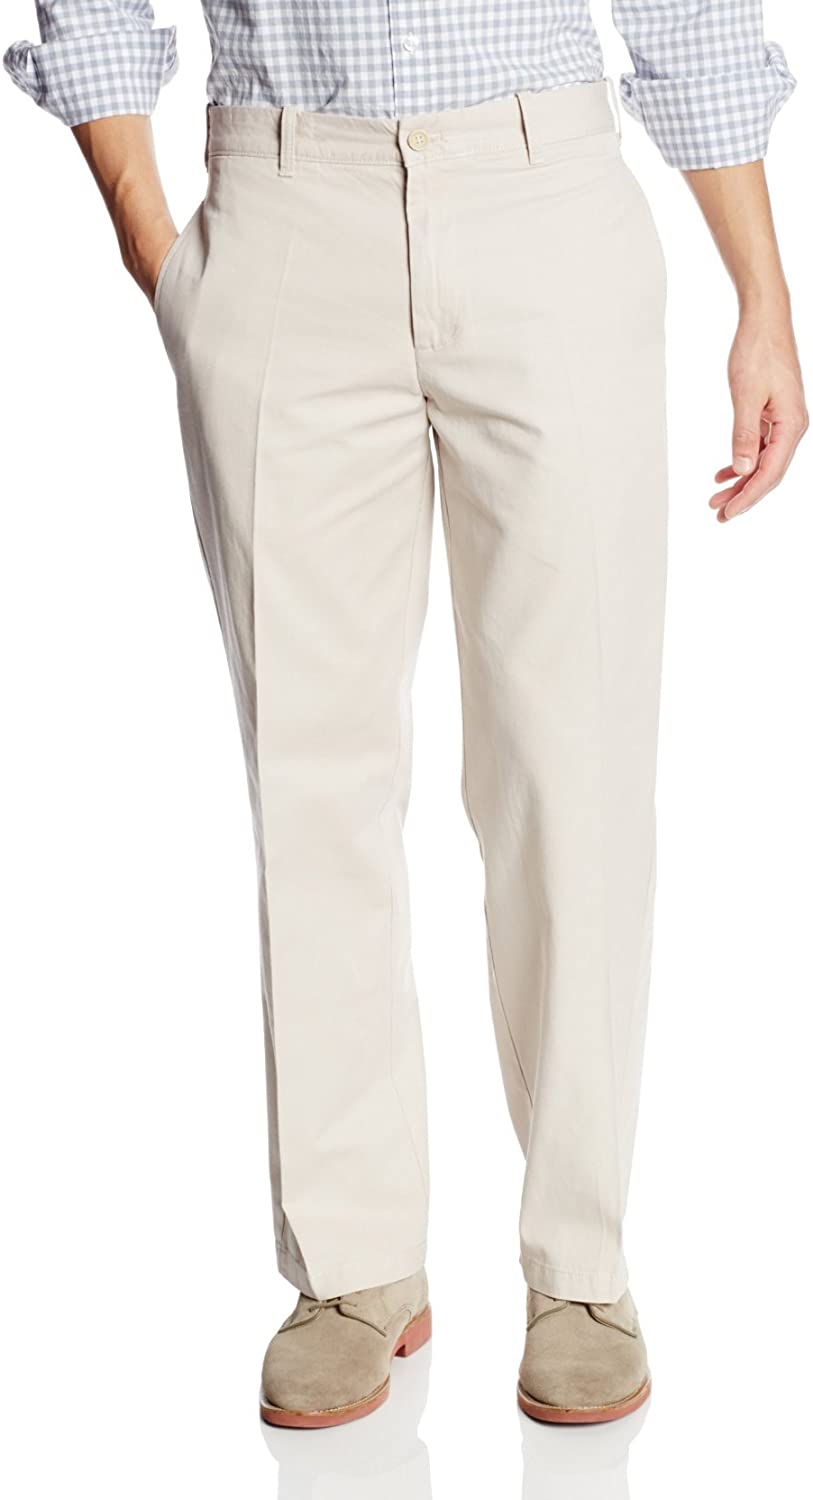 IZOD Men's Performance Stretch Straight Fit Flat Front Chino Pant Discontinued 